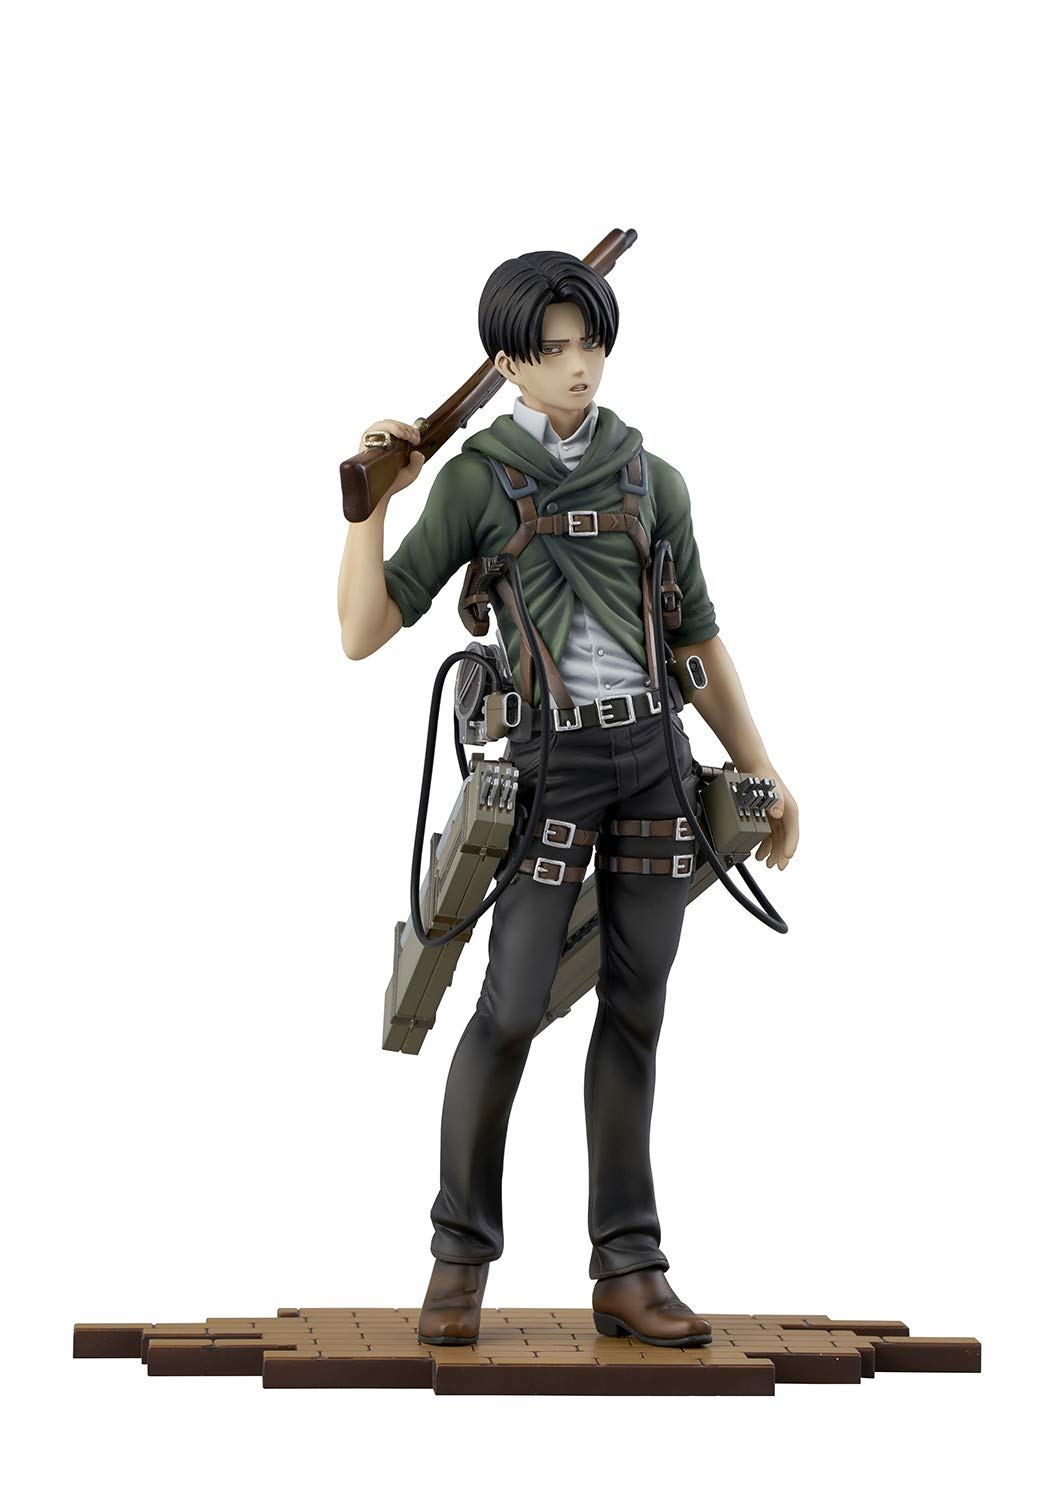 BRAVE-ACT ATTACK ON TITAN 1/8 SCALE PRE-PAINTED FIGURE: LEVI -VER. 2A- Sentinel